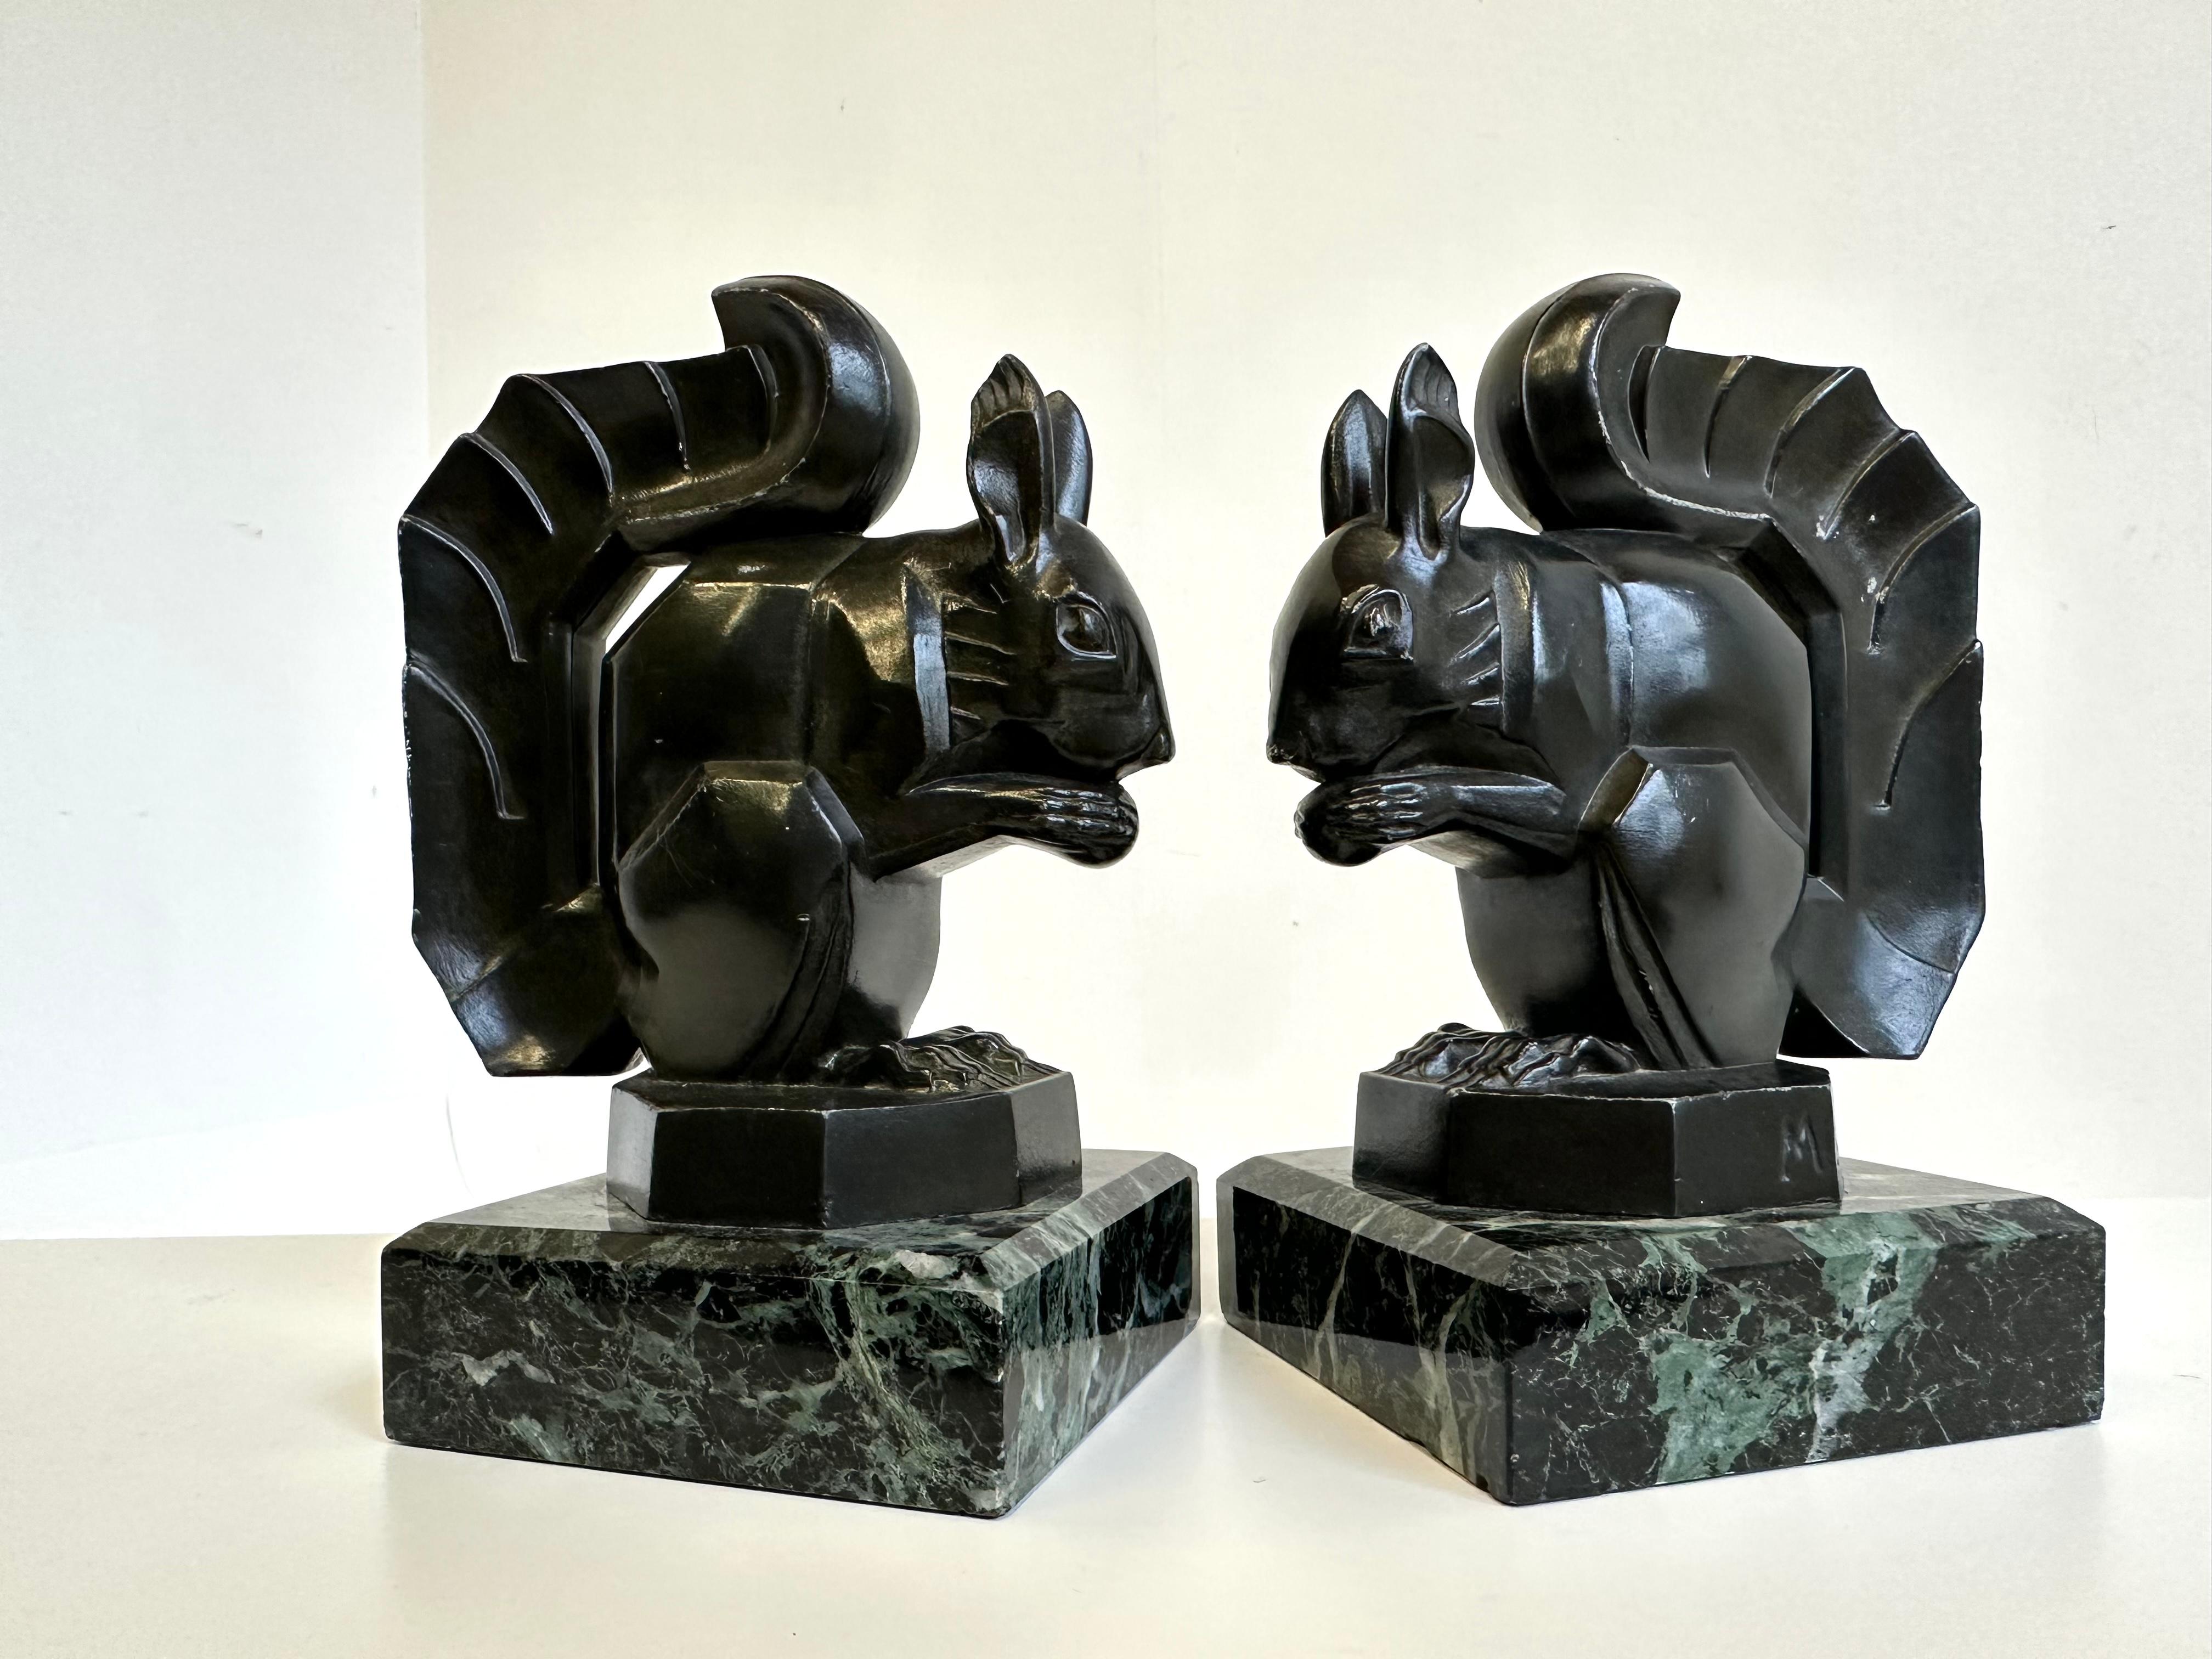 Hand-Crafted Antique Art Deco ''Squirrel'' Bookends by Max Le Verrier 1930 France Marble For Sale